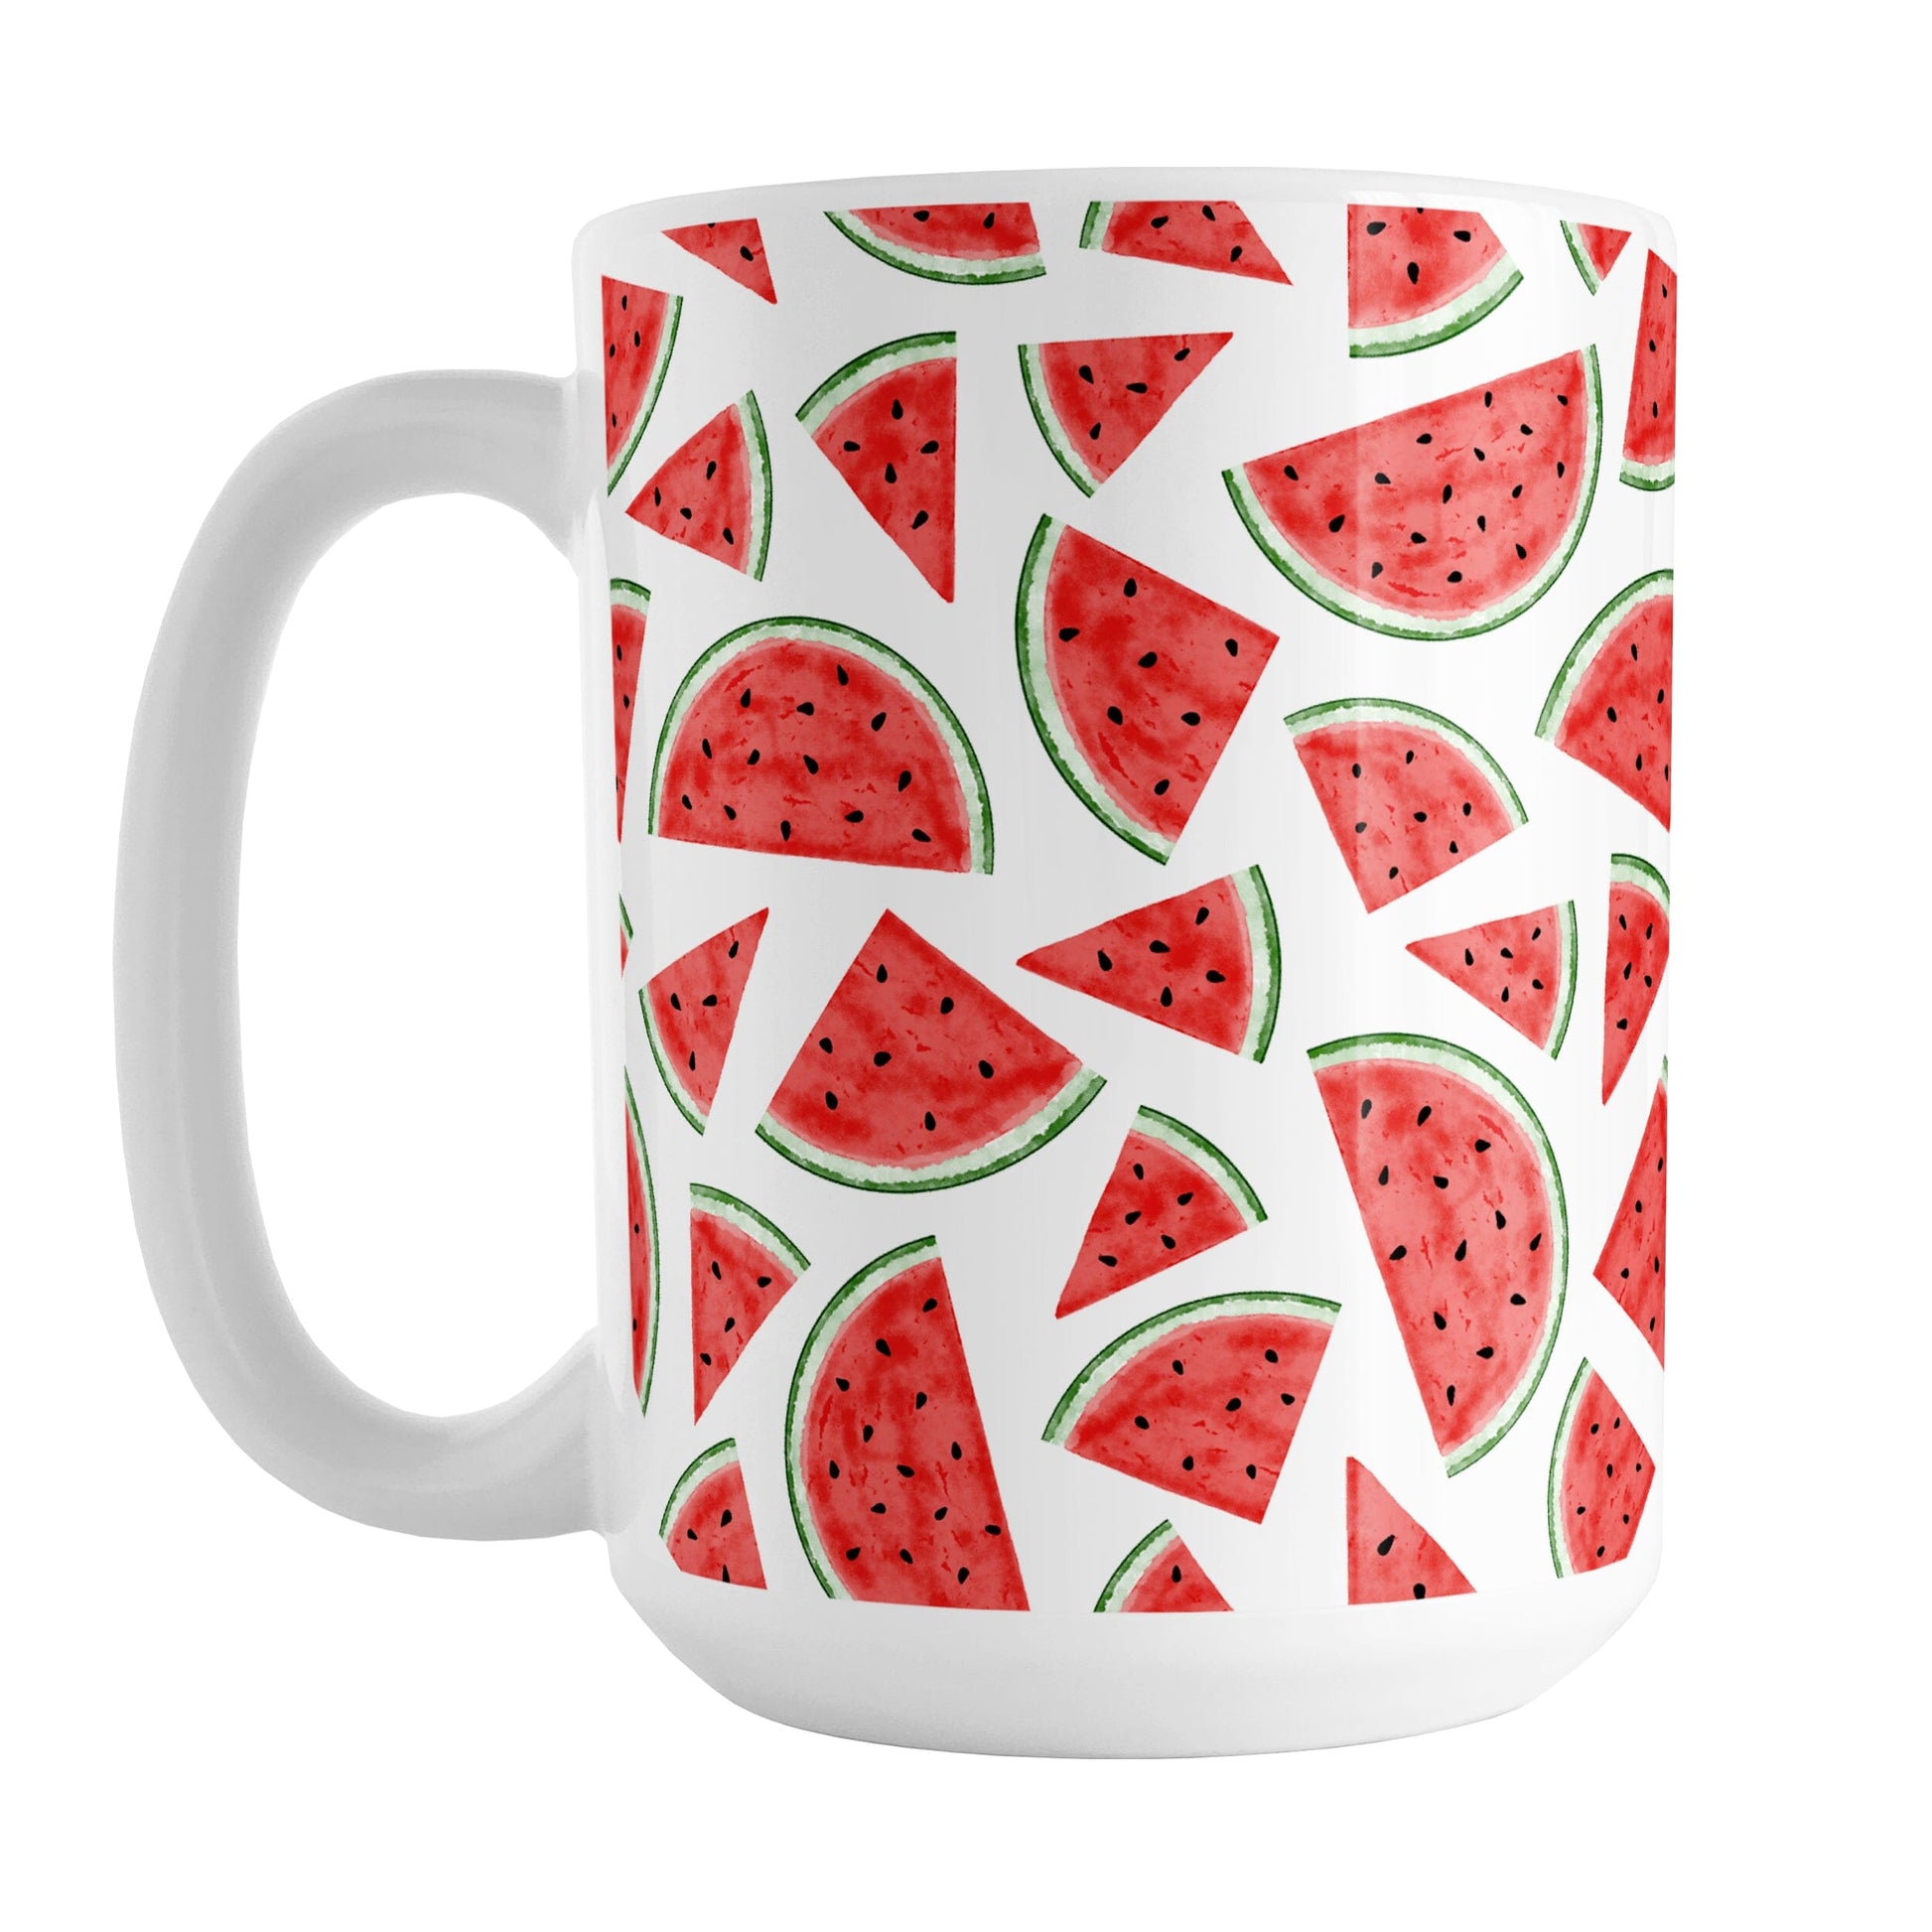 Watermelon Slices Mug (15oz) at Amy's Coffee Mugs. A ceramic coffee mug designed with a pattern of illustrated watermelon slices that wraps around the mug to the handle.